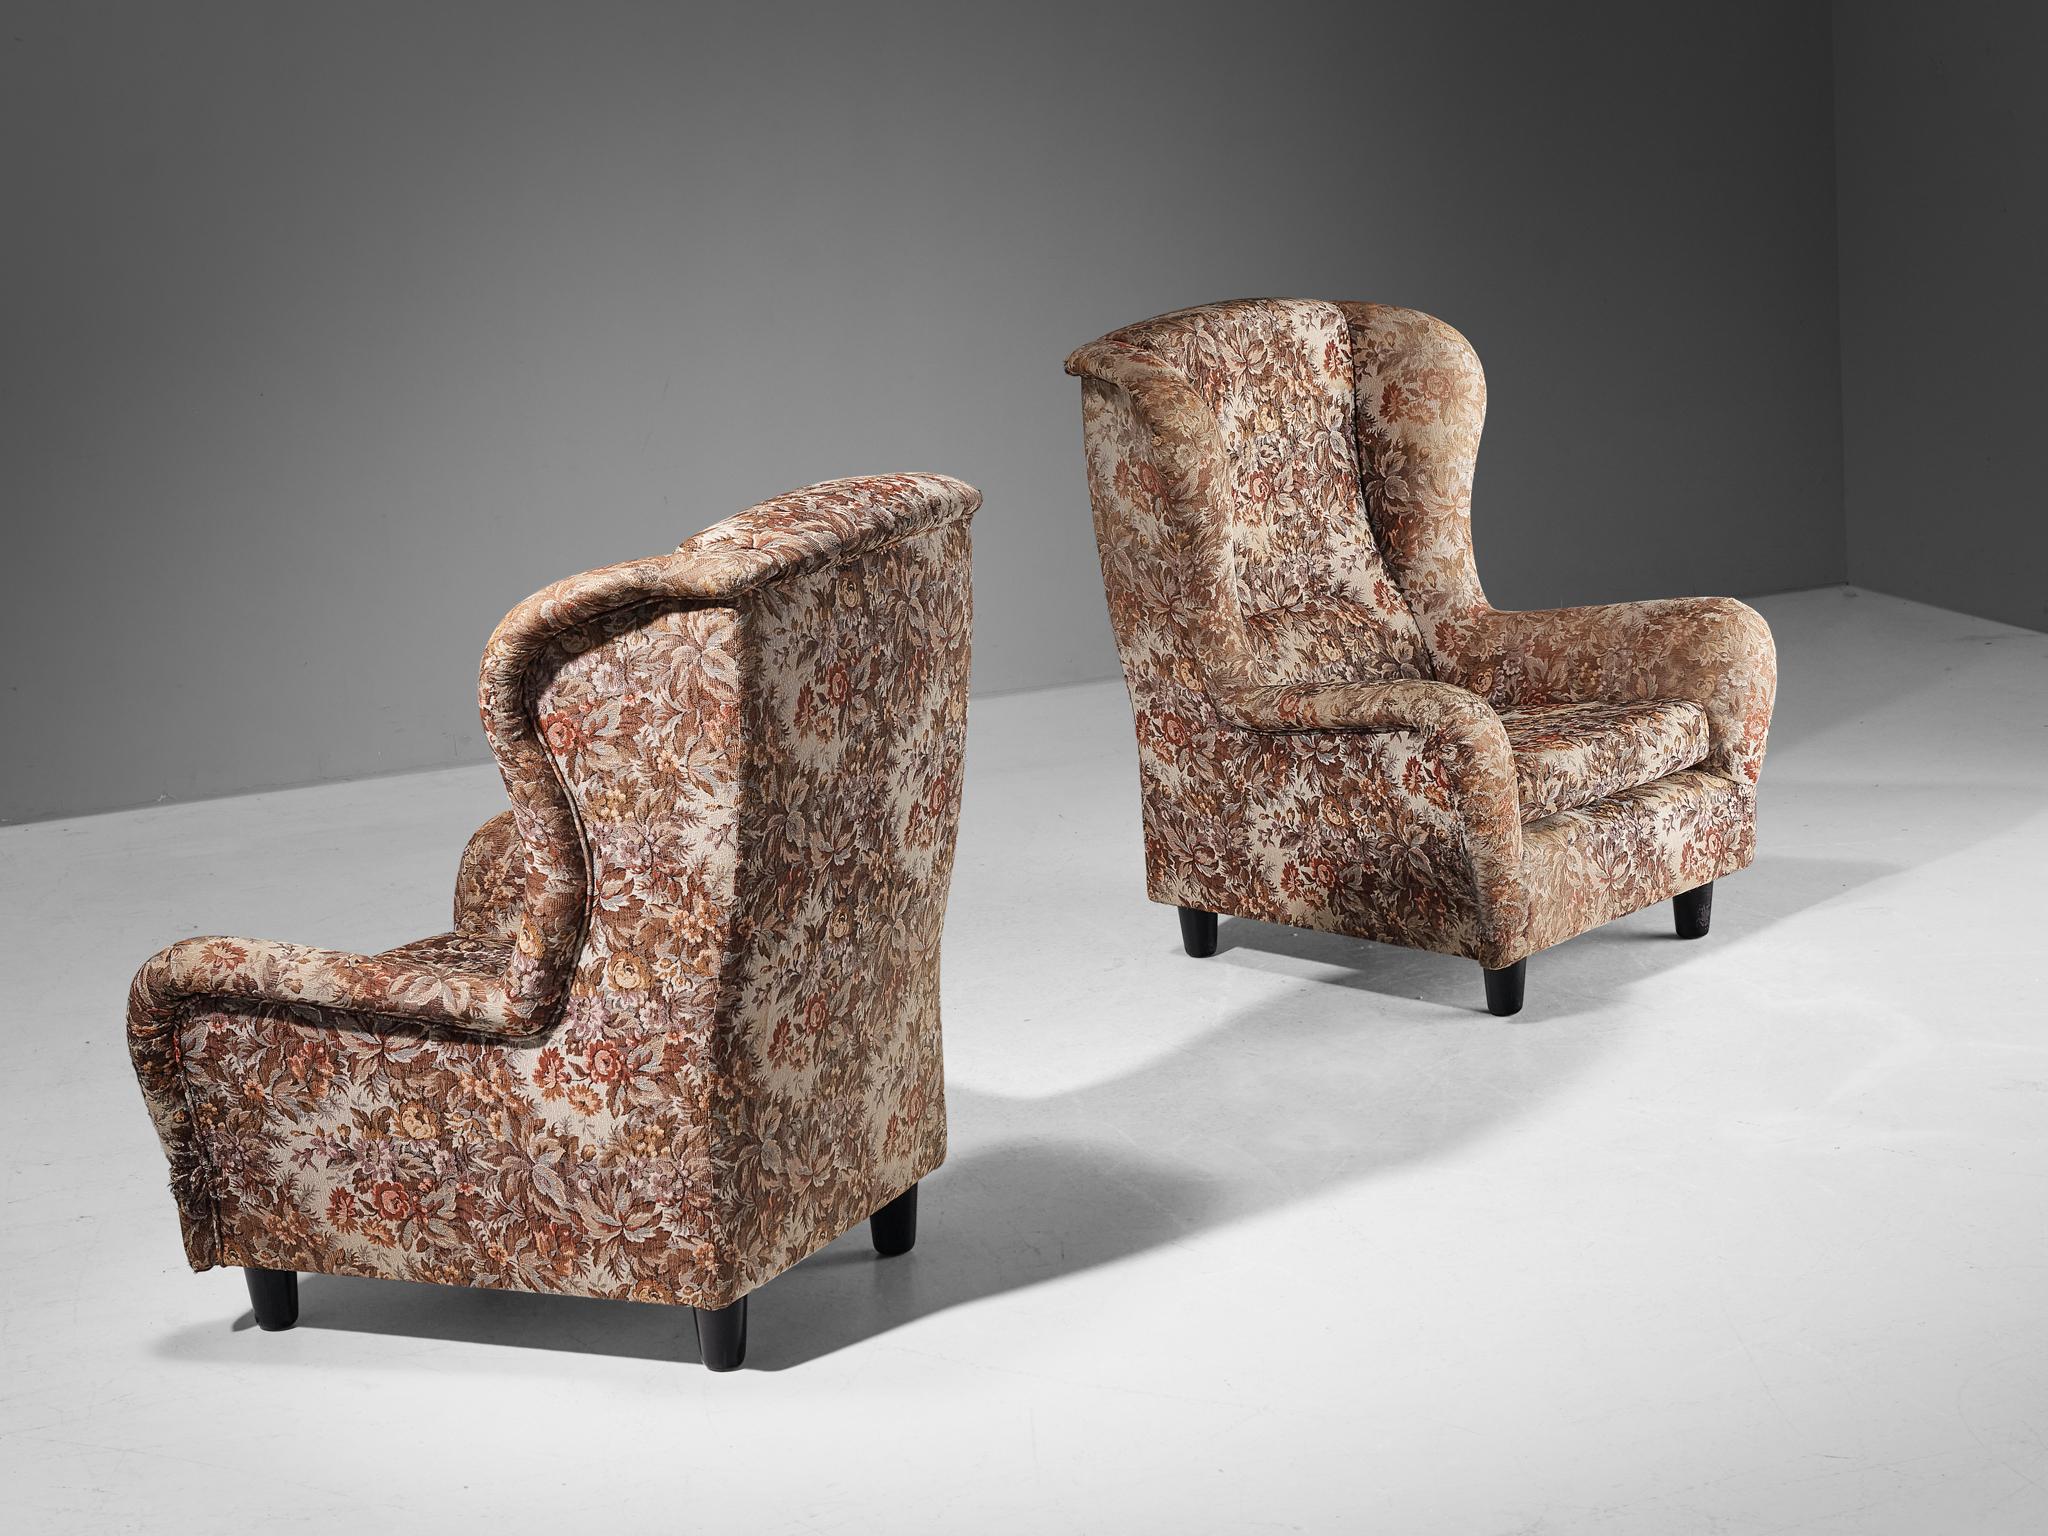 Pair of lounge chairs, fabric, lacquered wood, Czech Republic, 1940s 

These easy chairs are beautifully constructed featuring a shell shaped frame with sinuous ears that bring a more open and inviting look to the quite solid design. The upholstery